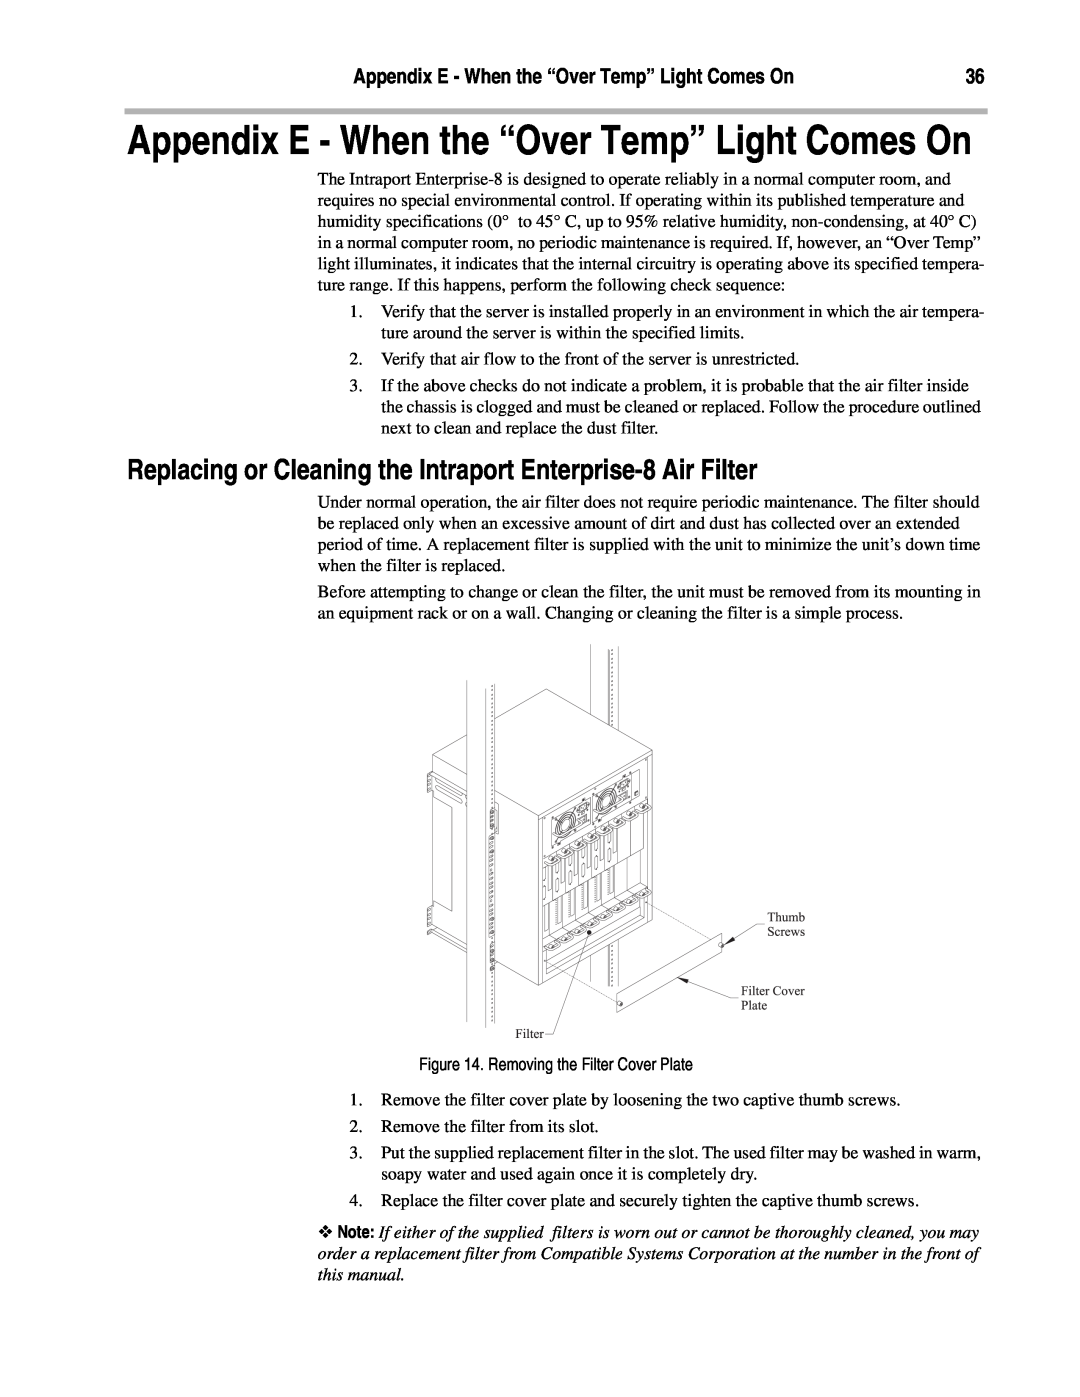 Compatible Systems A00-1869 manual Replacing or Cleaning the Intraport Enterprise-8 Air Filter 